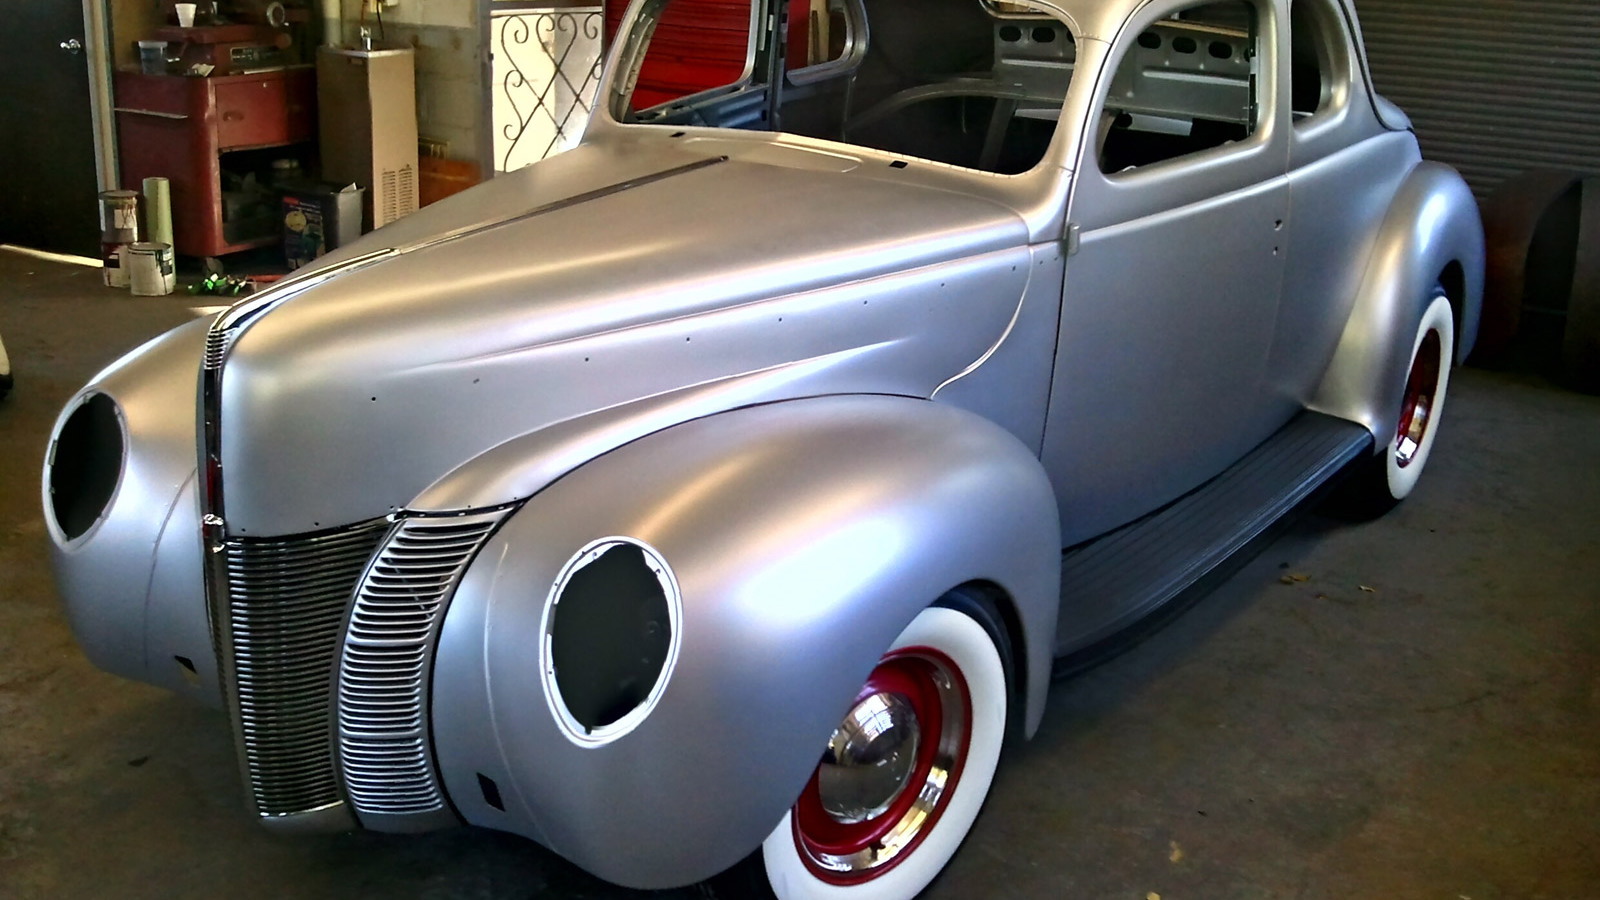 1940 Ford Coupe officially licensed reproduction body shell